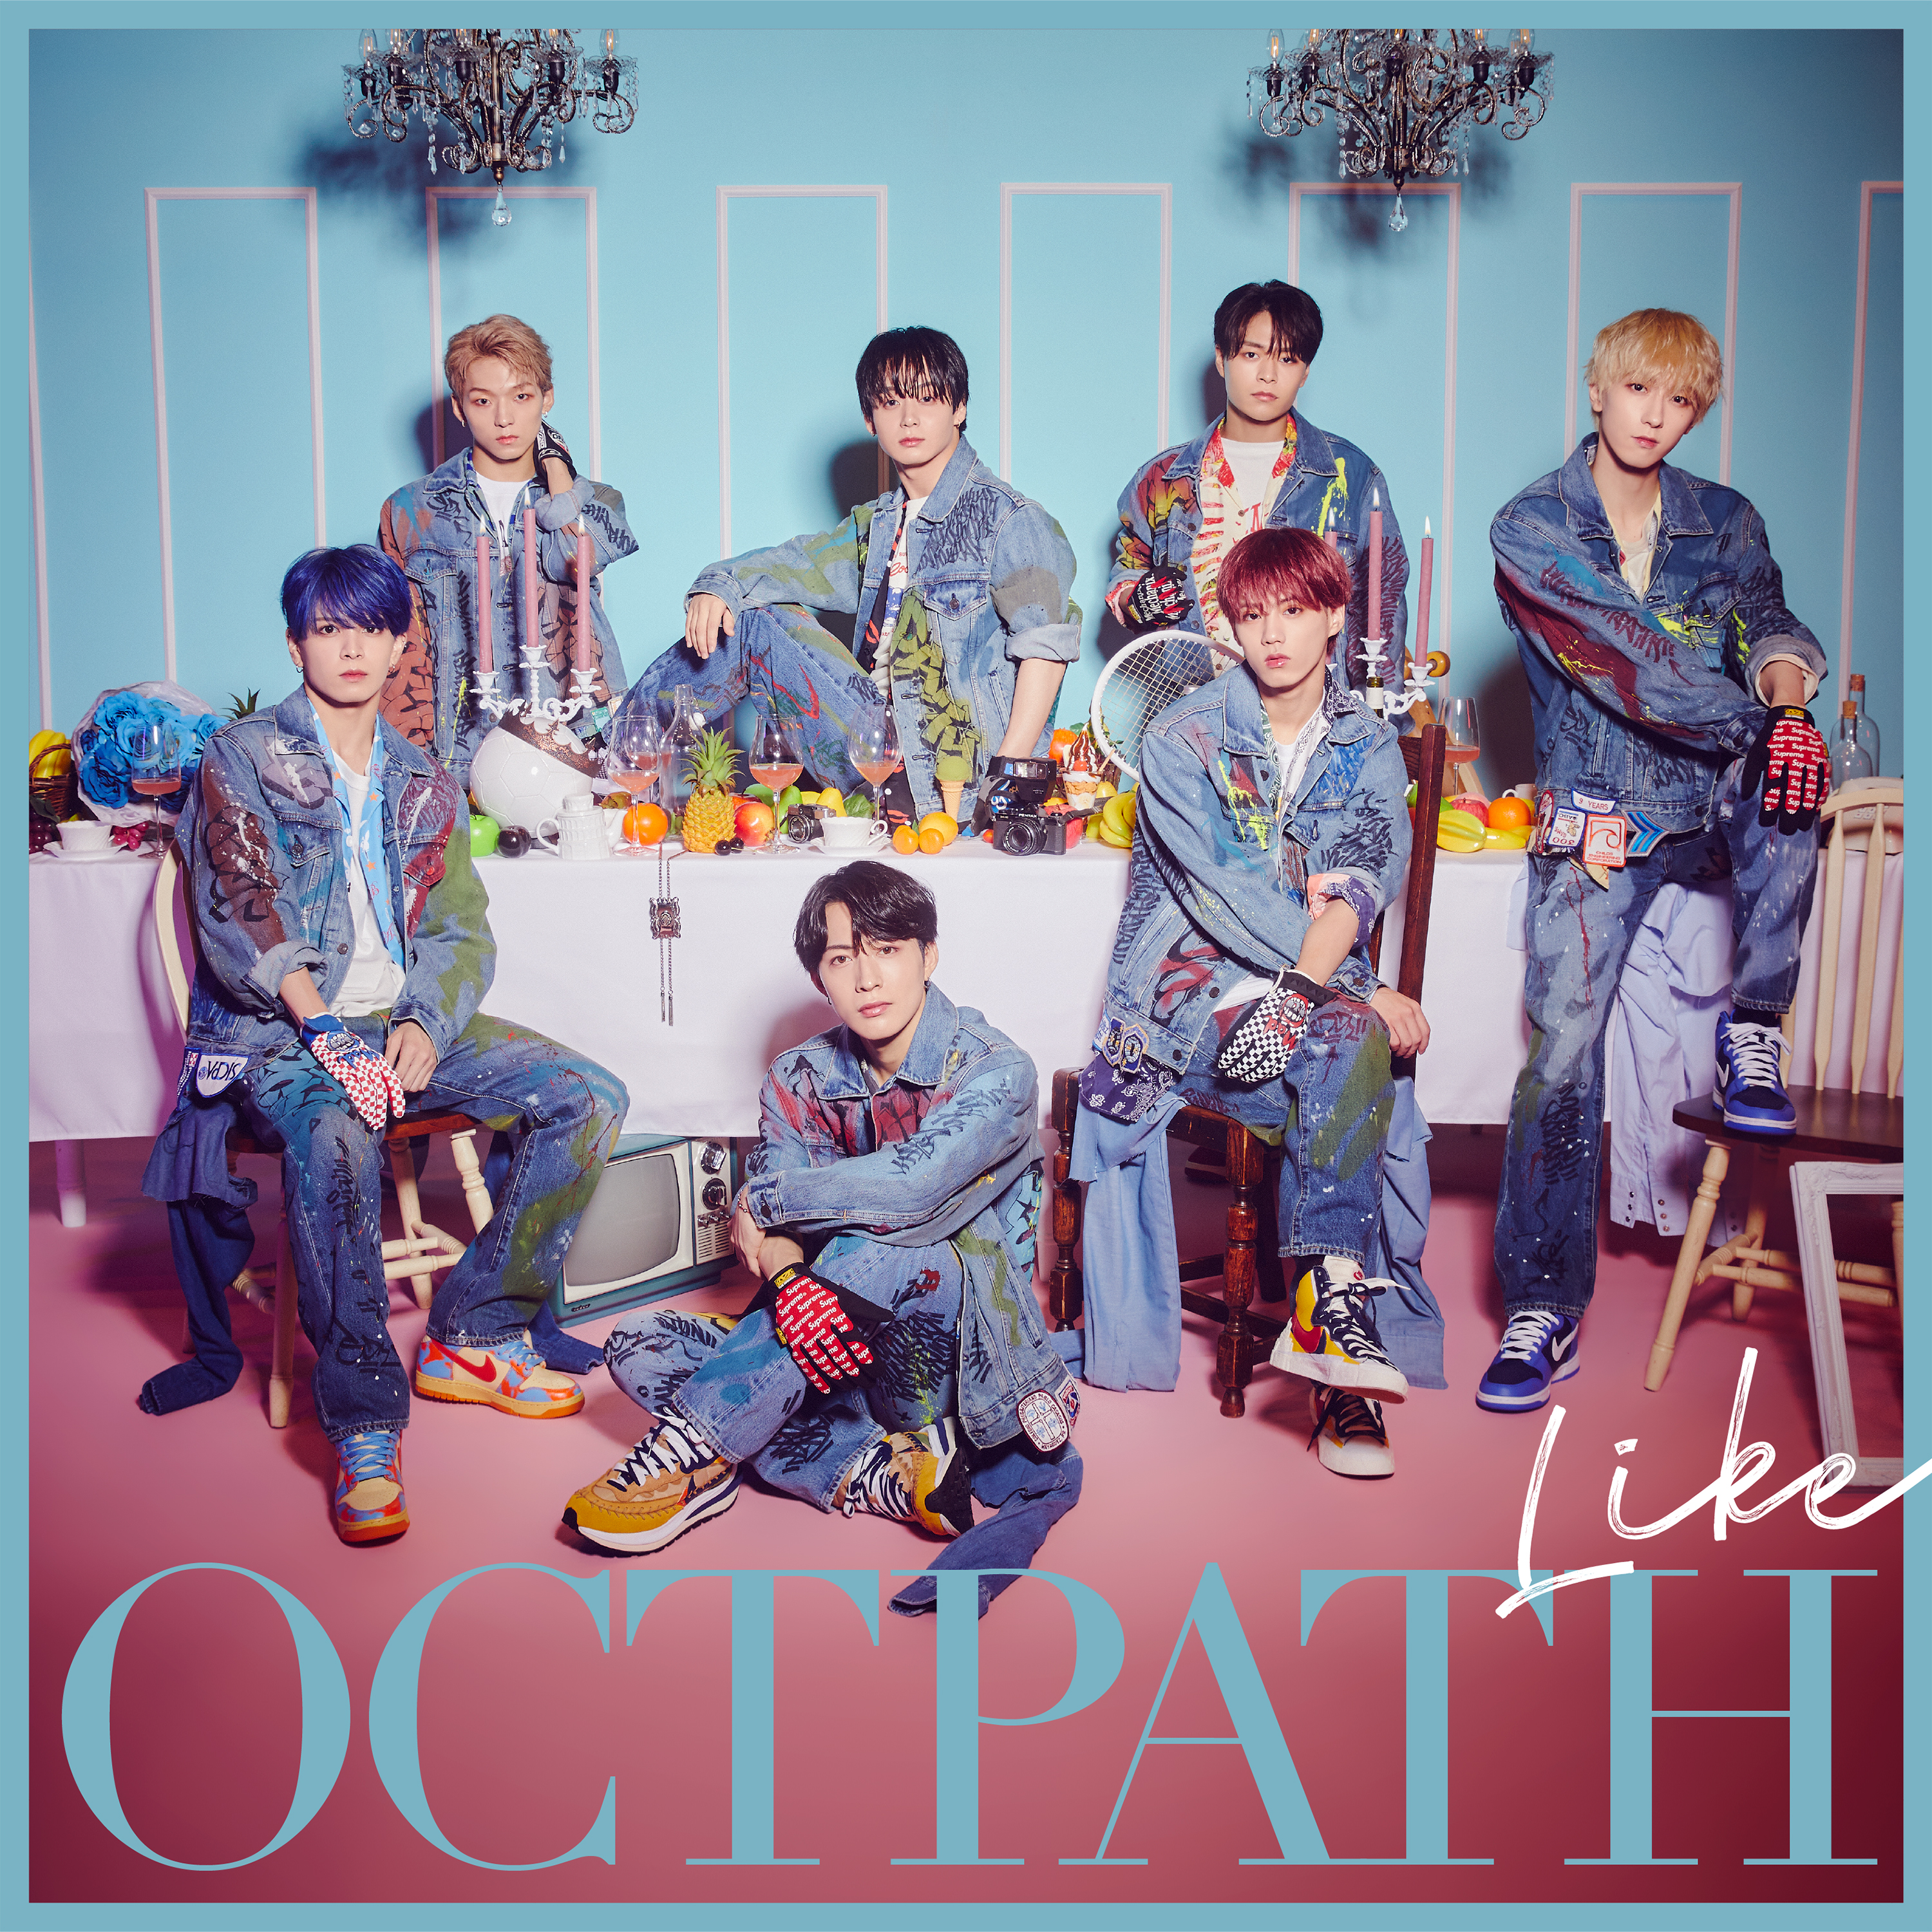 our Good Time」 11月16日リリース3rd single『Like』に追加収録決定